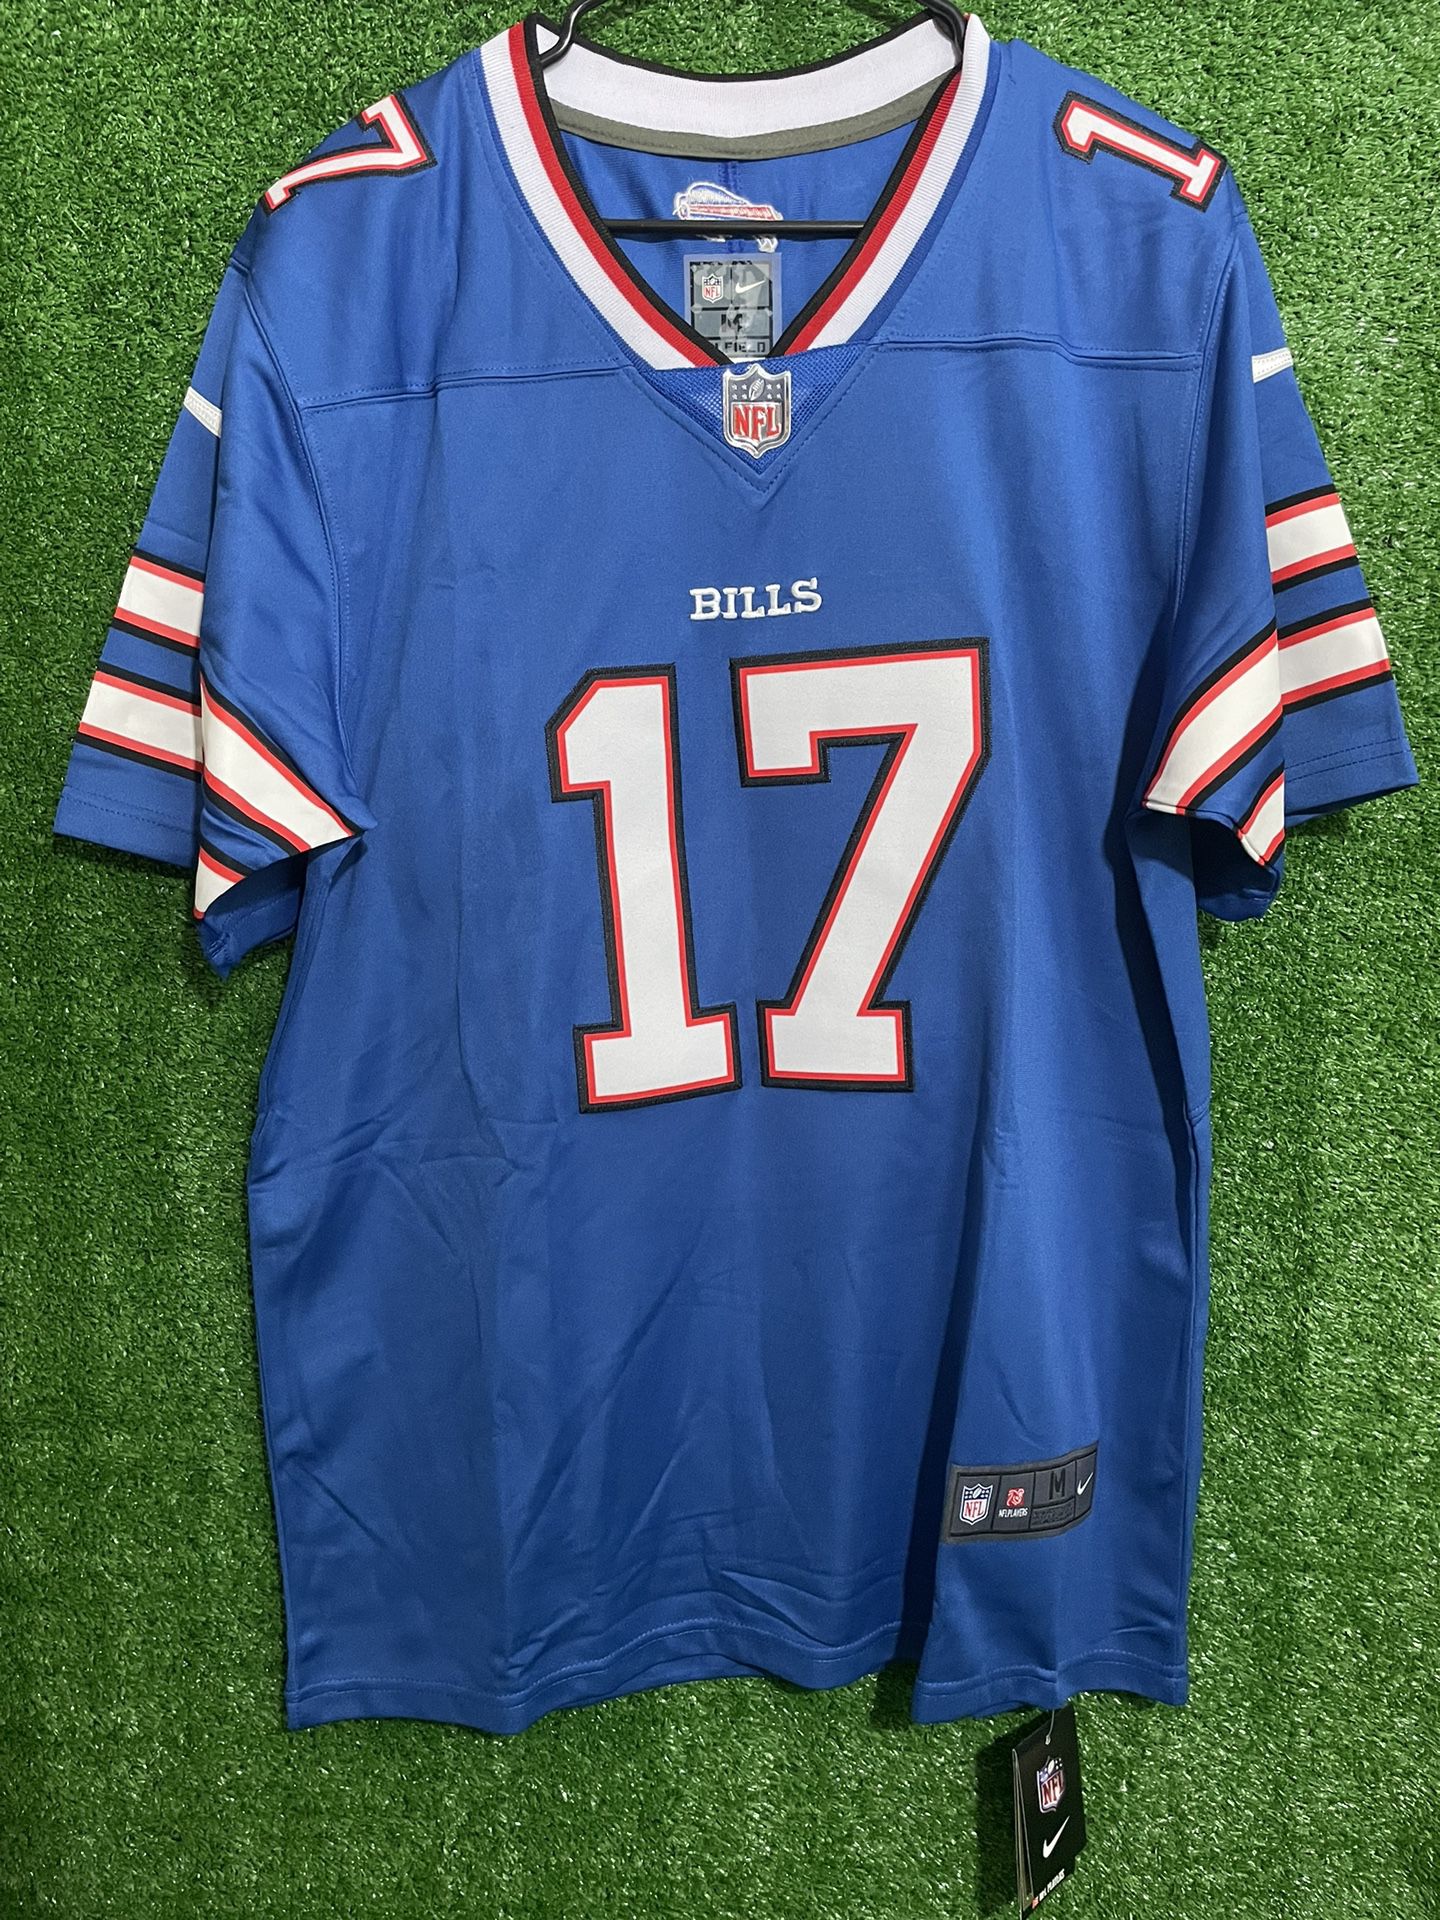 JOSH ALLEN BUFFALO BILLS NIKE JERSEY BRAND NEW WITH TAGS SIZES MEDIUM, LARGE AND XL AVAILABLE